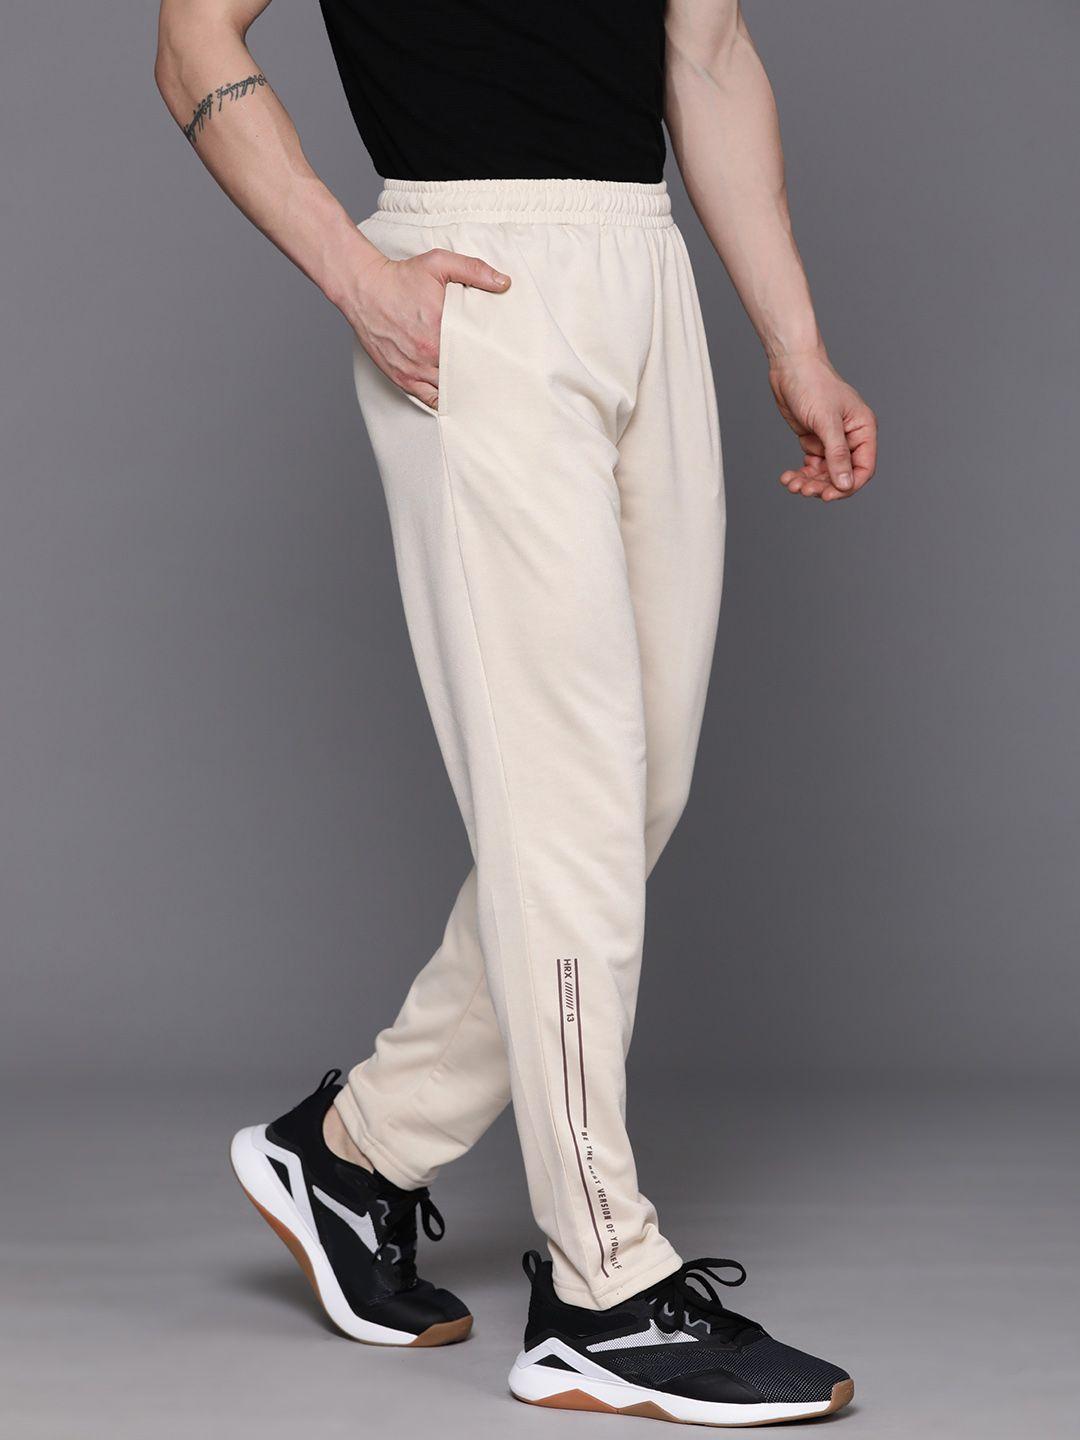 hrx by hrithik roshan men lifestyle track pants with placement typography